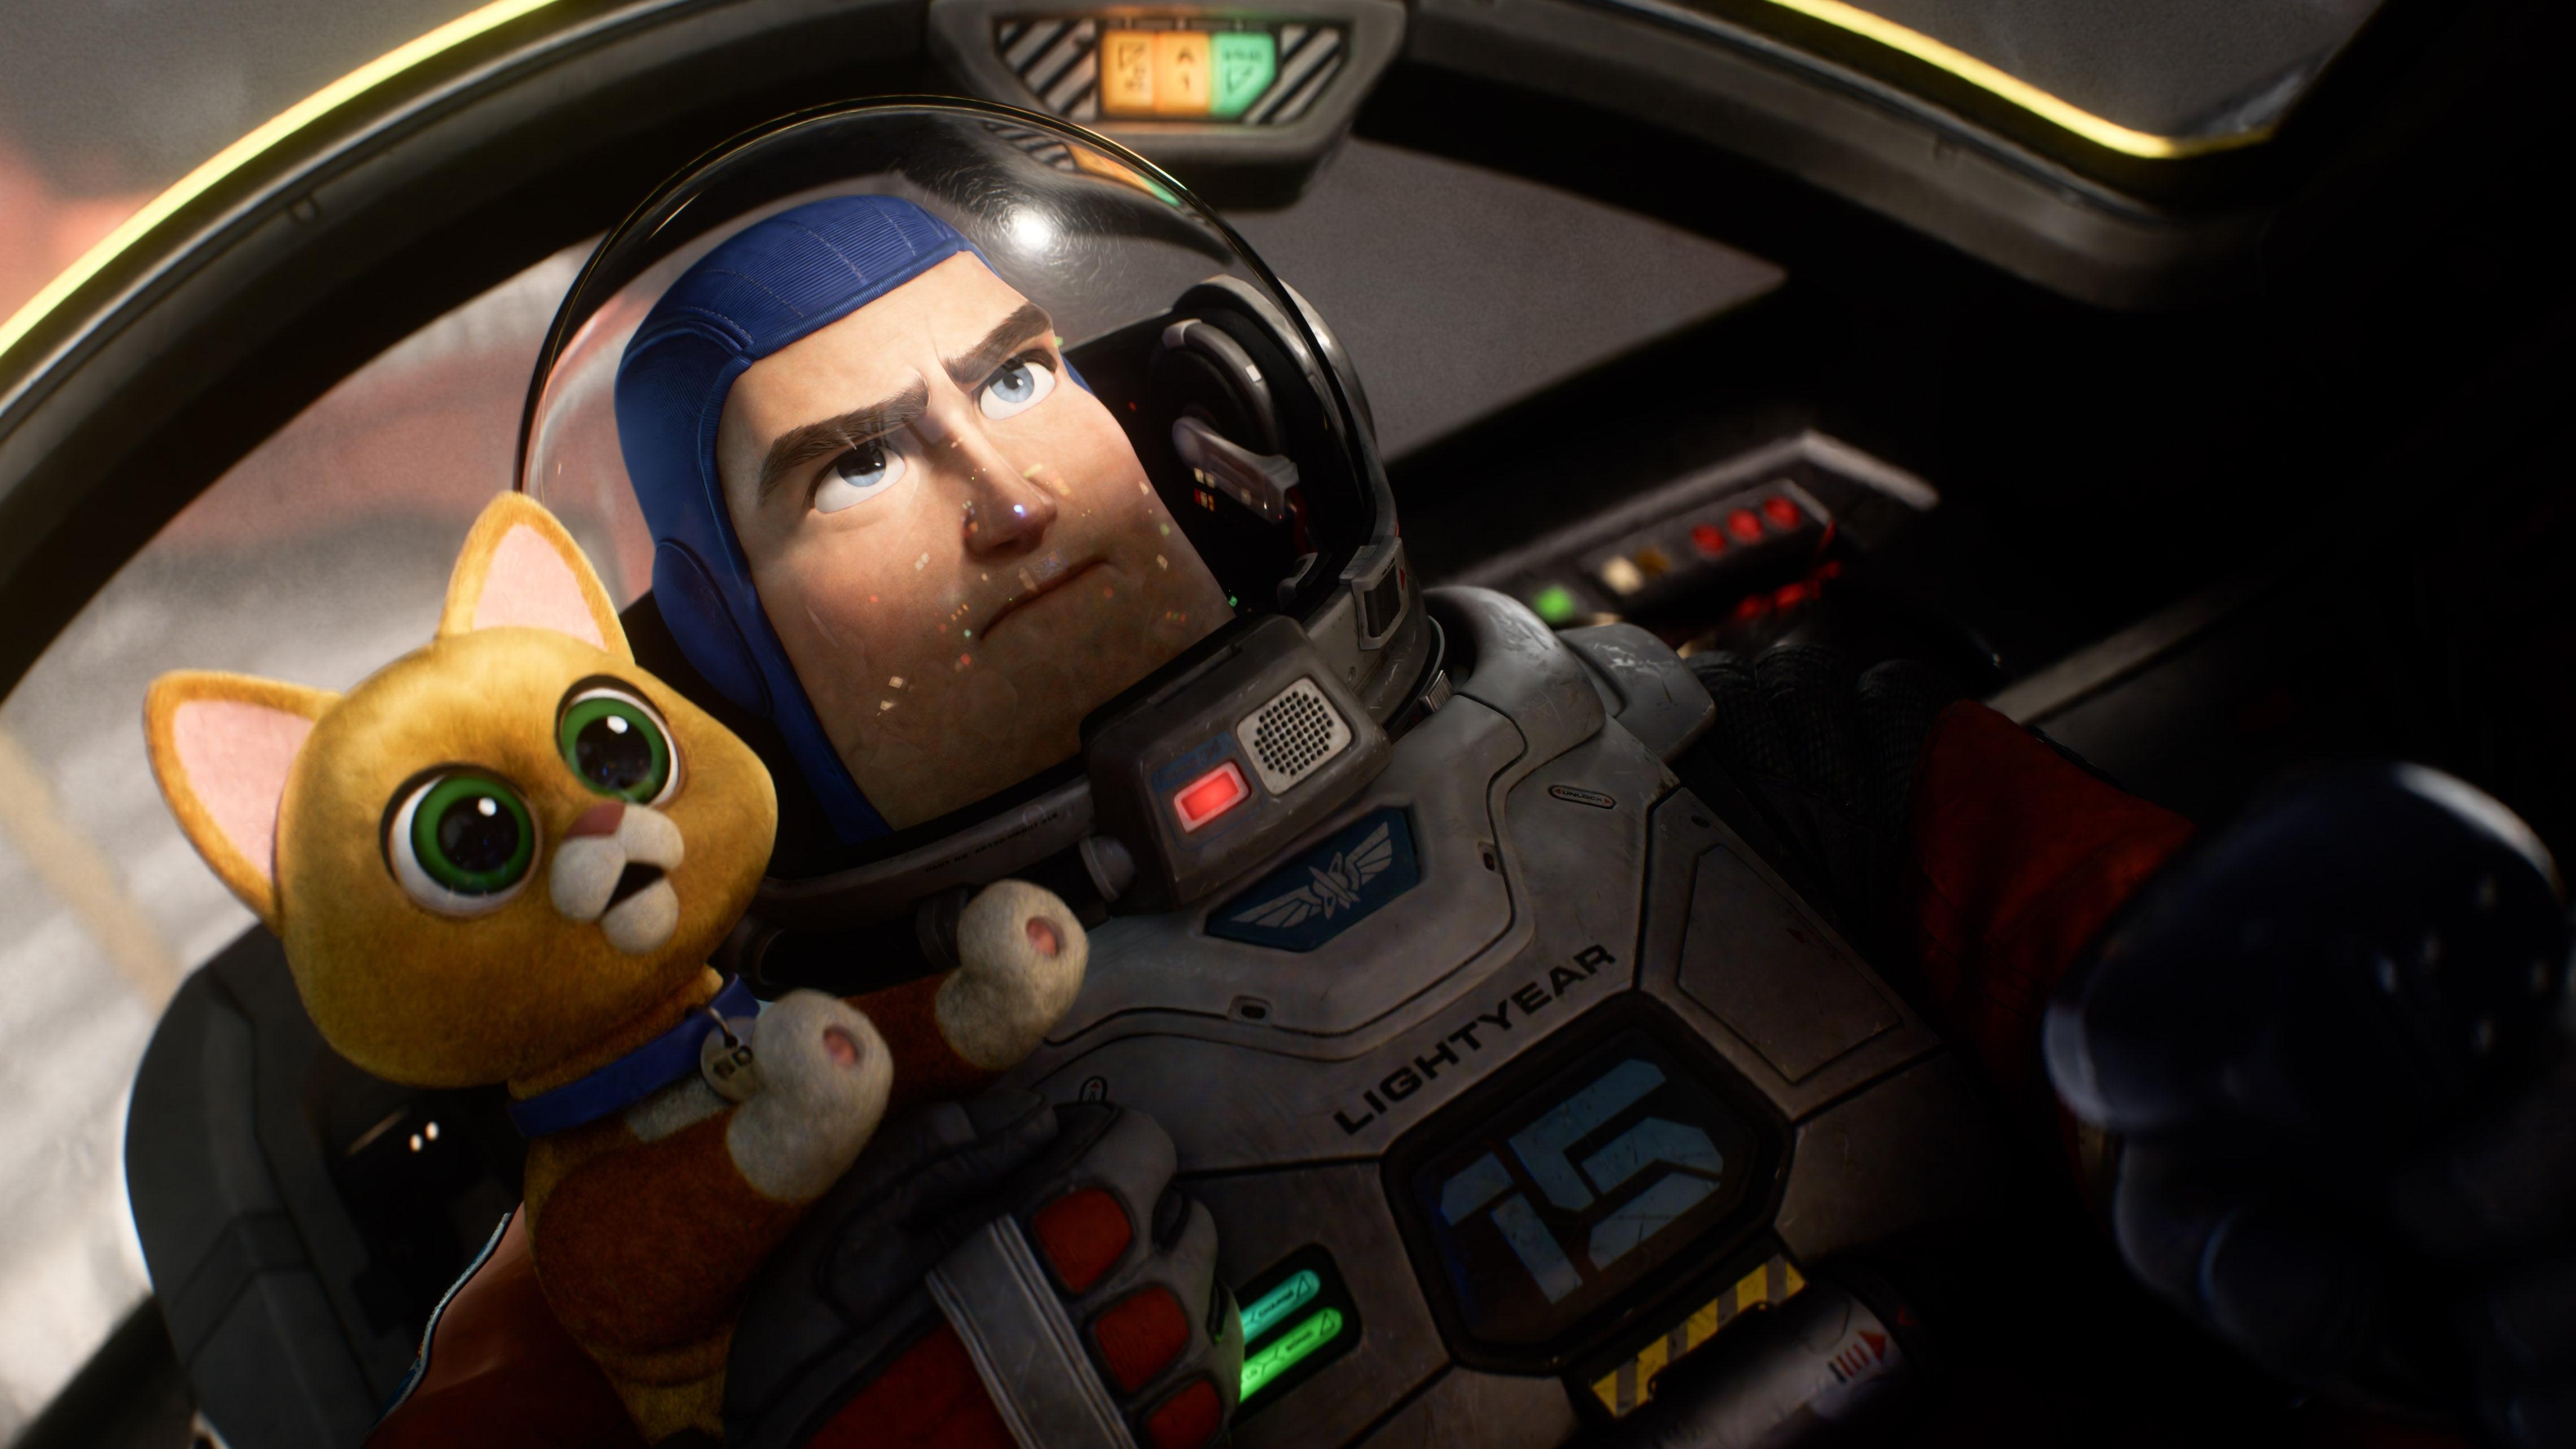 Chris Evans’ Buzz and his robot cat go on a space mission in the Lightyear trailer